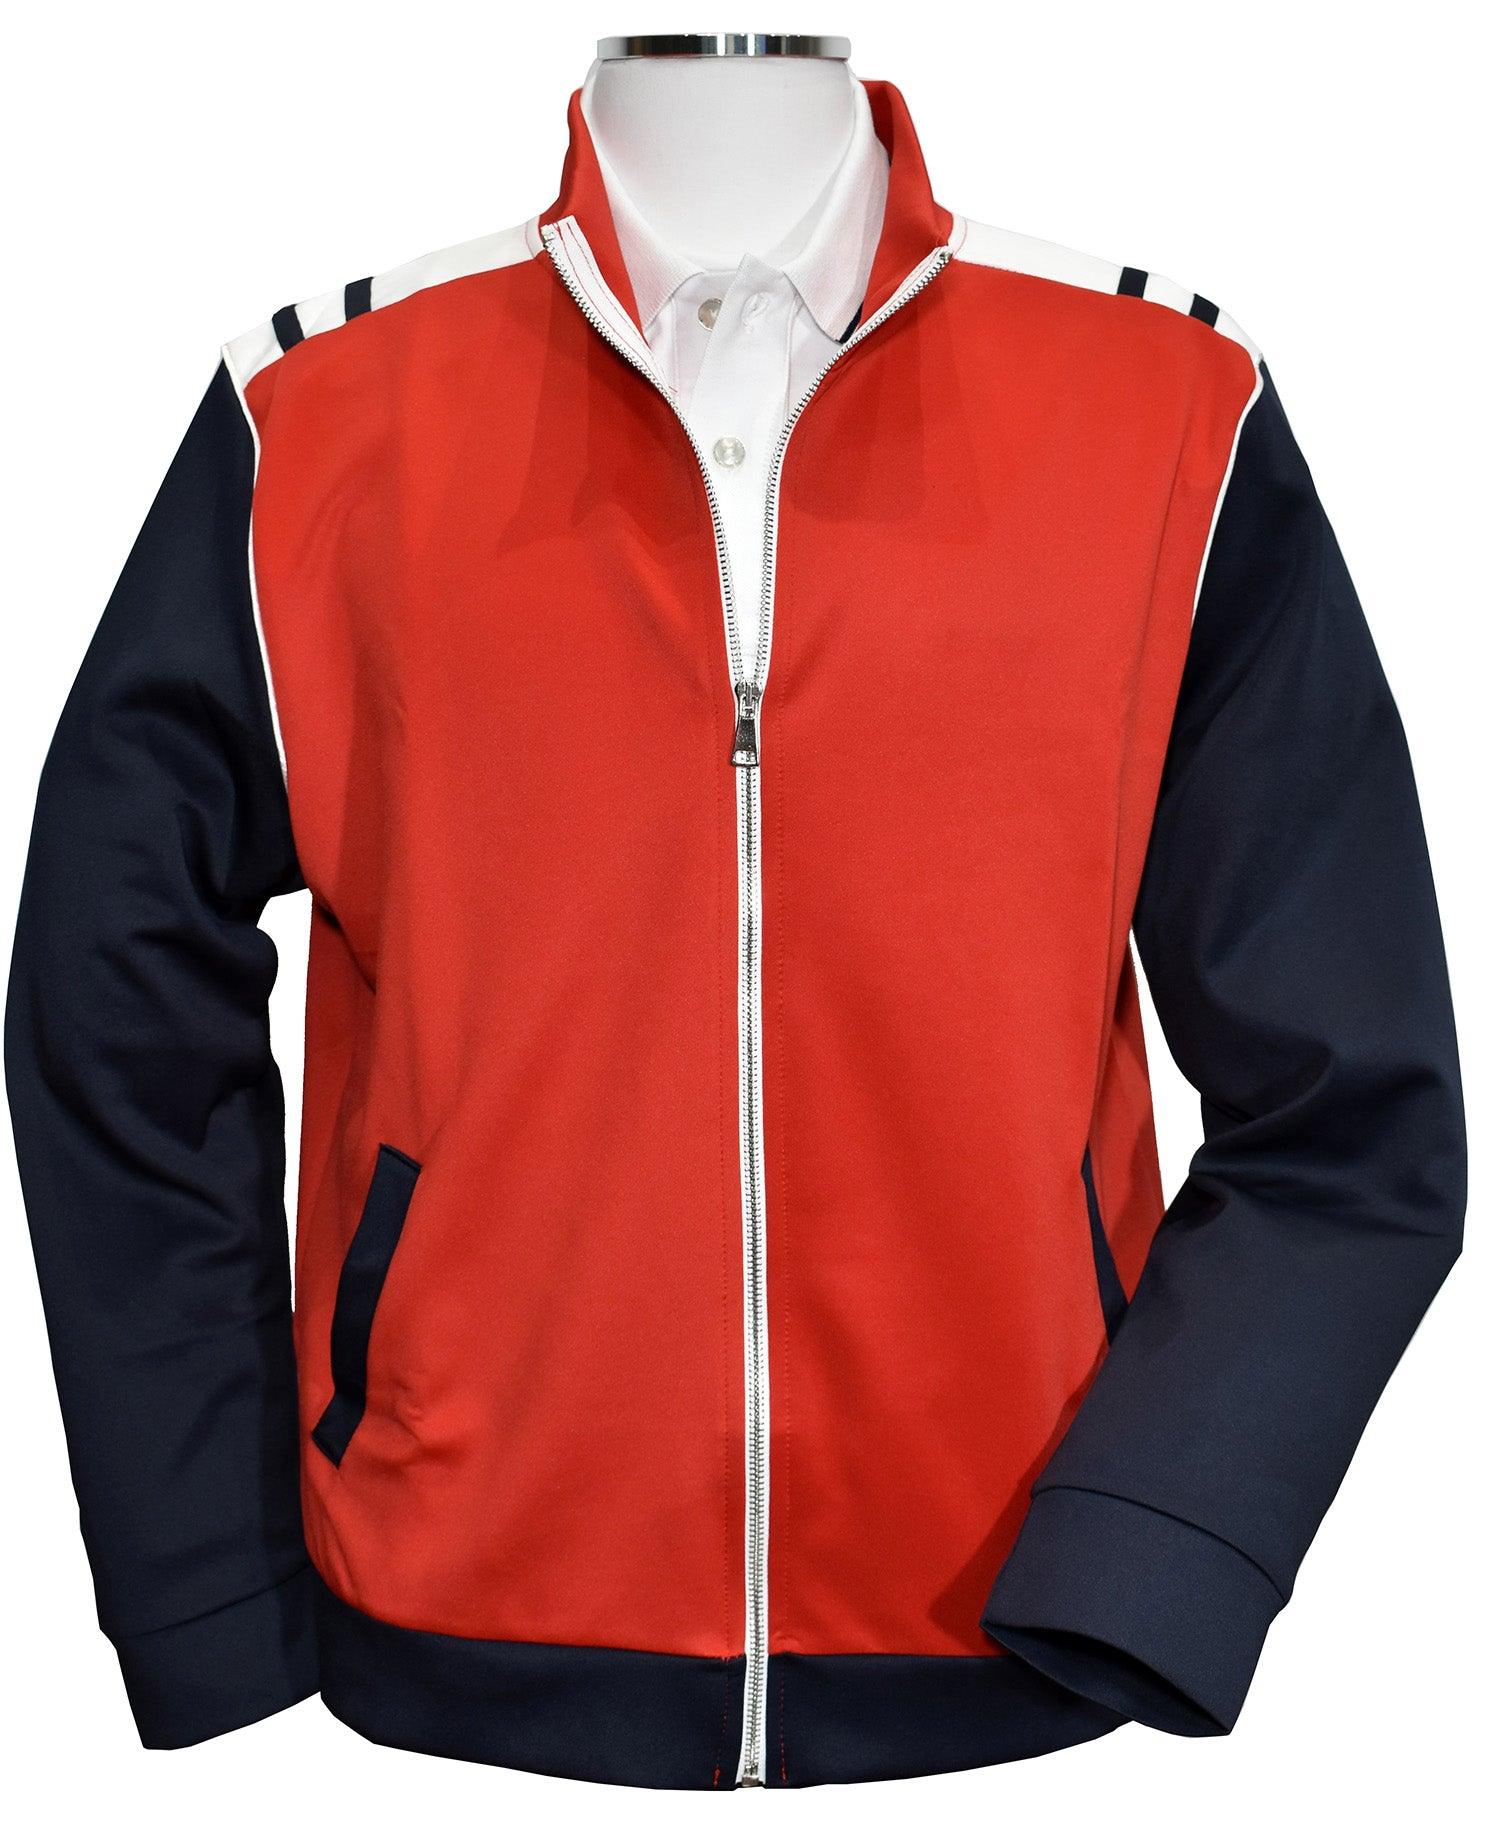 Poly microfiber fabric for comfort and style. Accent red and white trim creates a flair sure to get noticed. Classic jacket style with side slash pockets and full zip, great for layering. Pant features a stretch waist band, tie front and classic pockets. Pants feature an open bottom. Made in Italy.